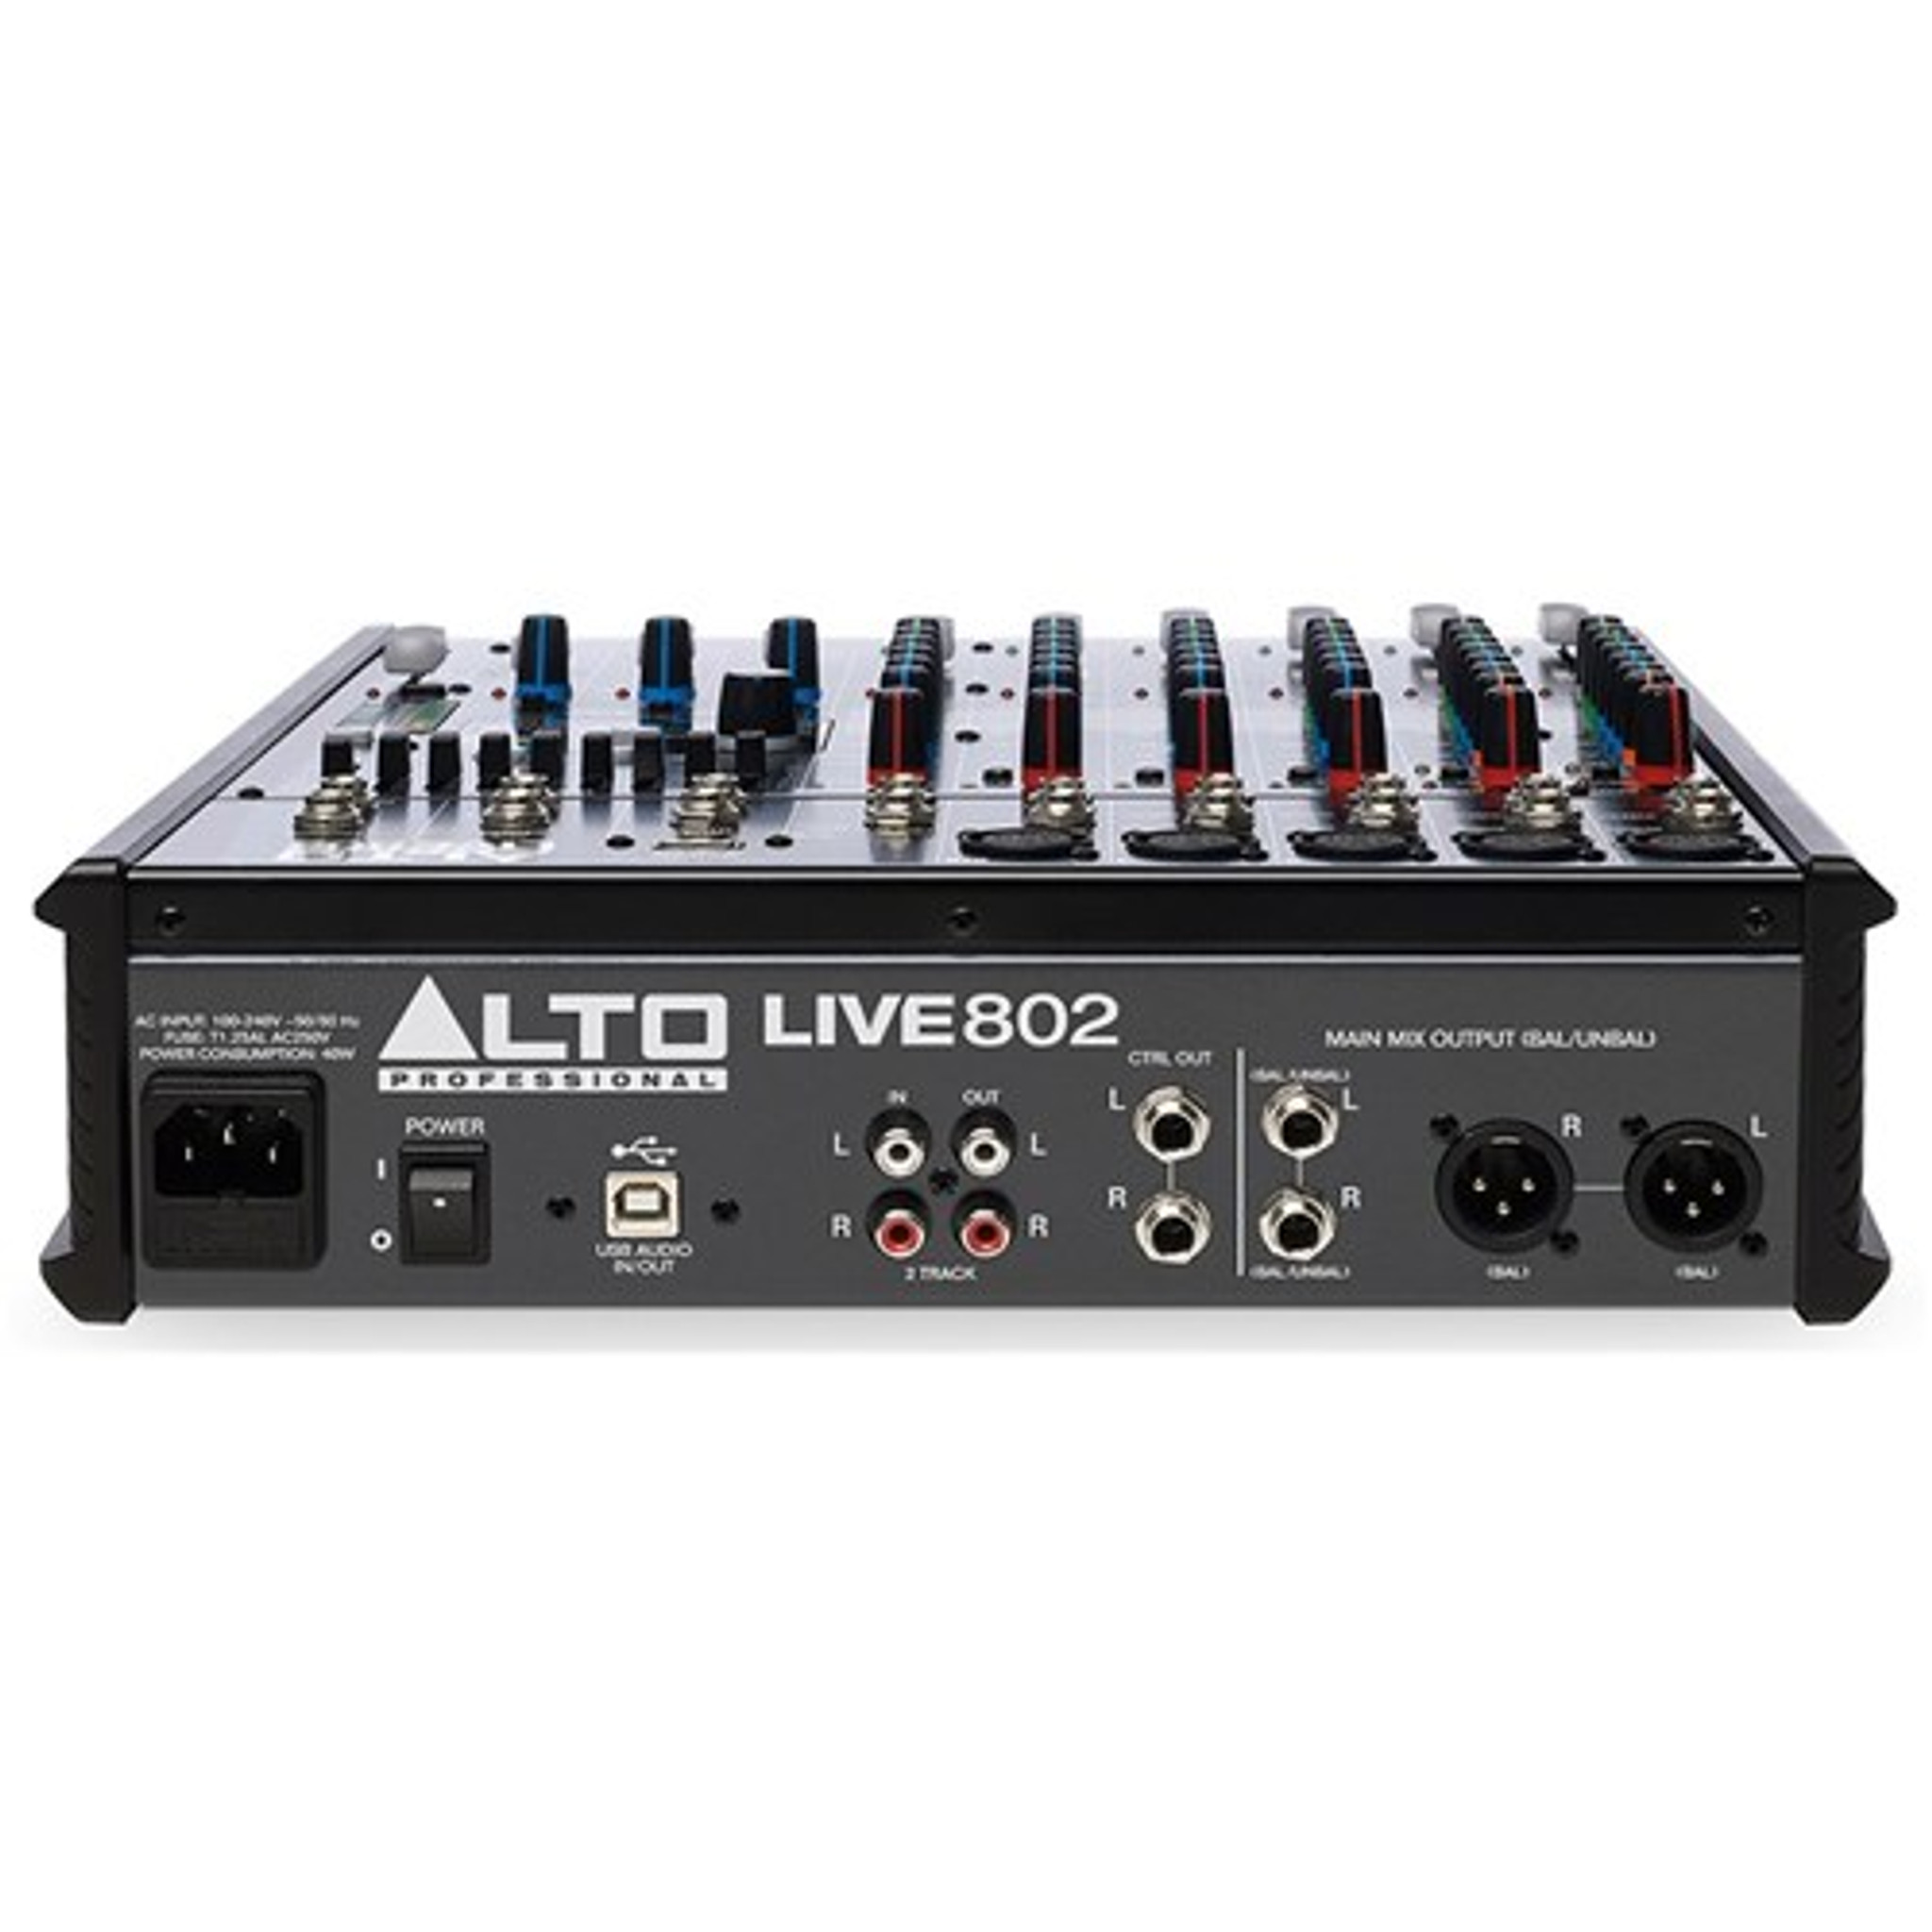 Alto Live 802 Professional 2-Bus w/ & Effects - Music On Stage